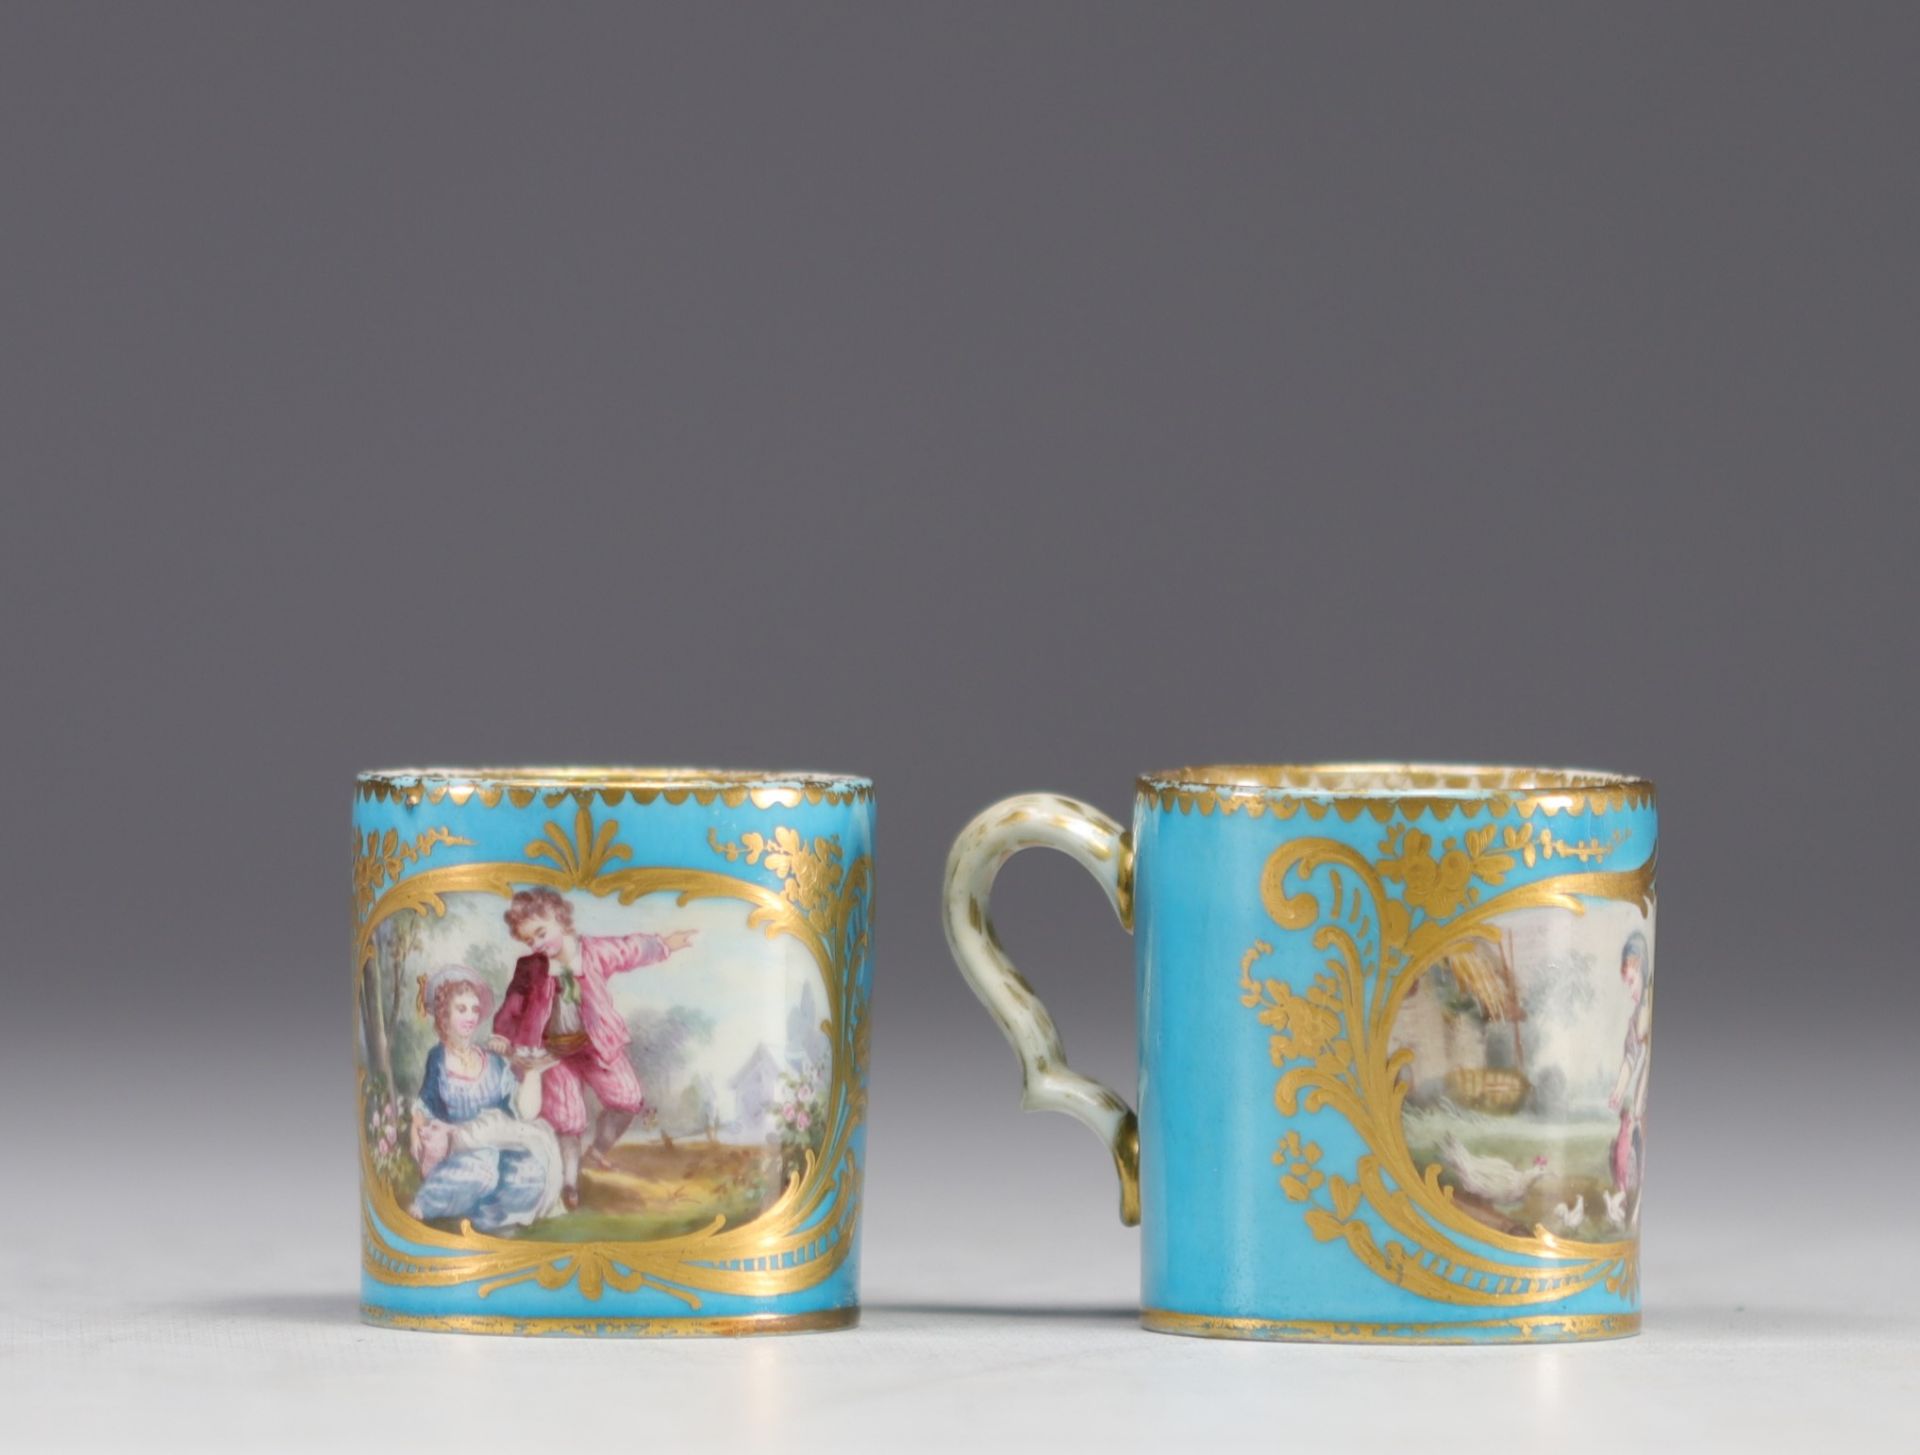 Tete a tete" service in Sevres porcelain on a celestial blue background. - Image 5 of 10